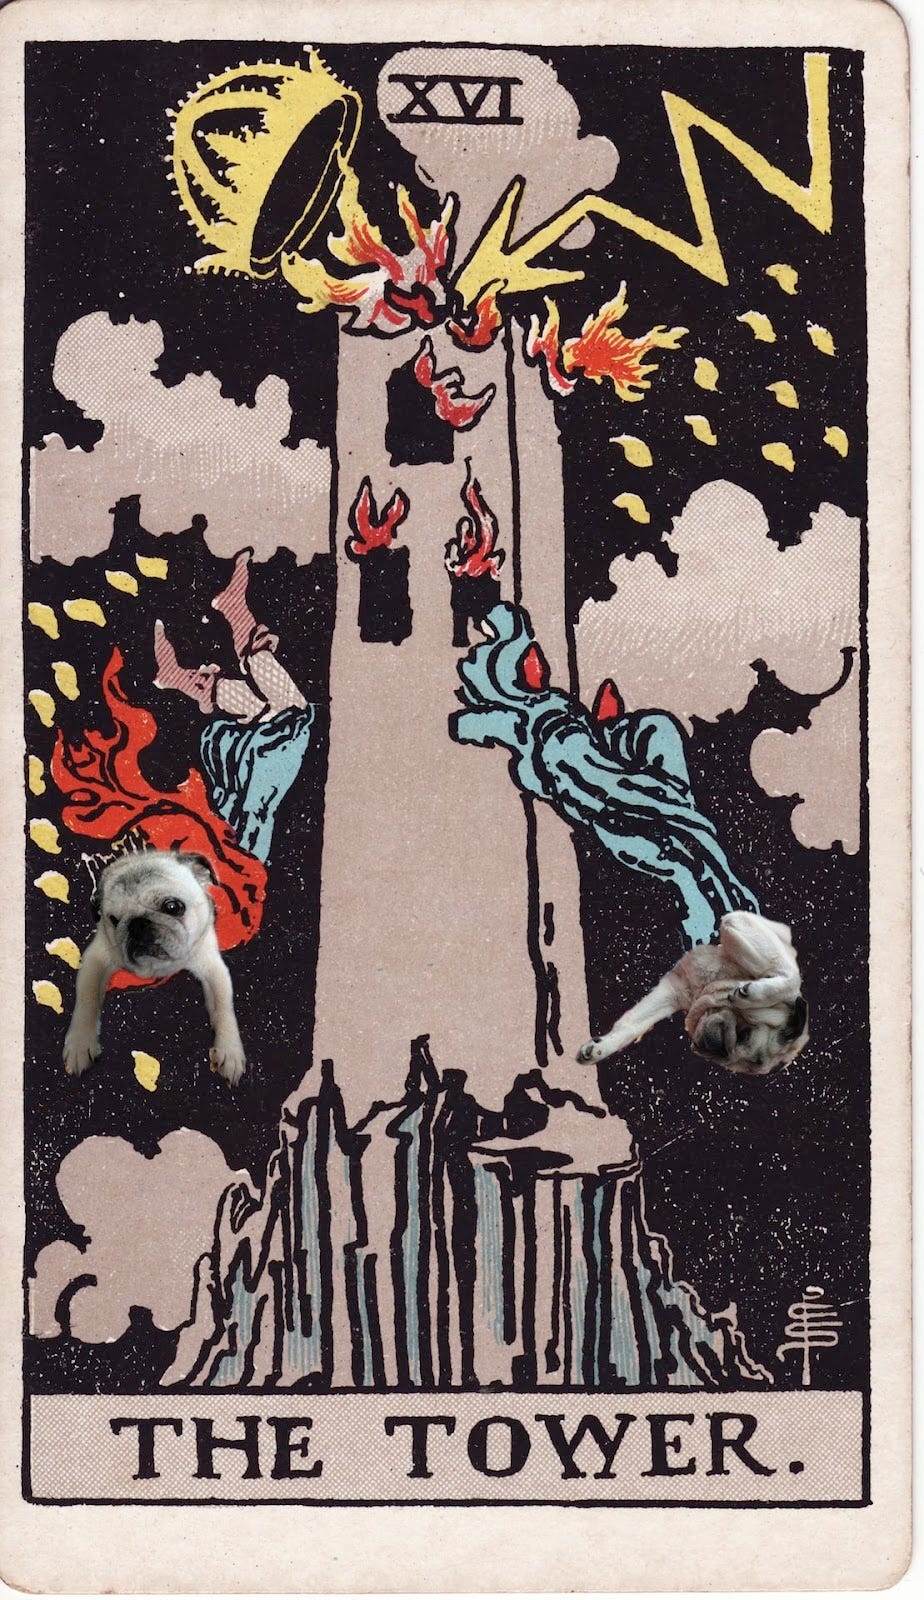 The Tower tarot card from the Rider-Waite deck with Gary the pug Photoshopped poorly into it.